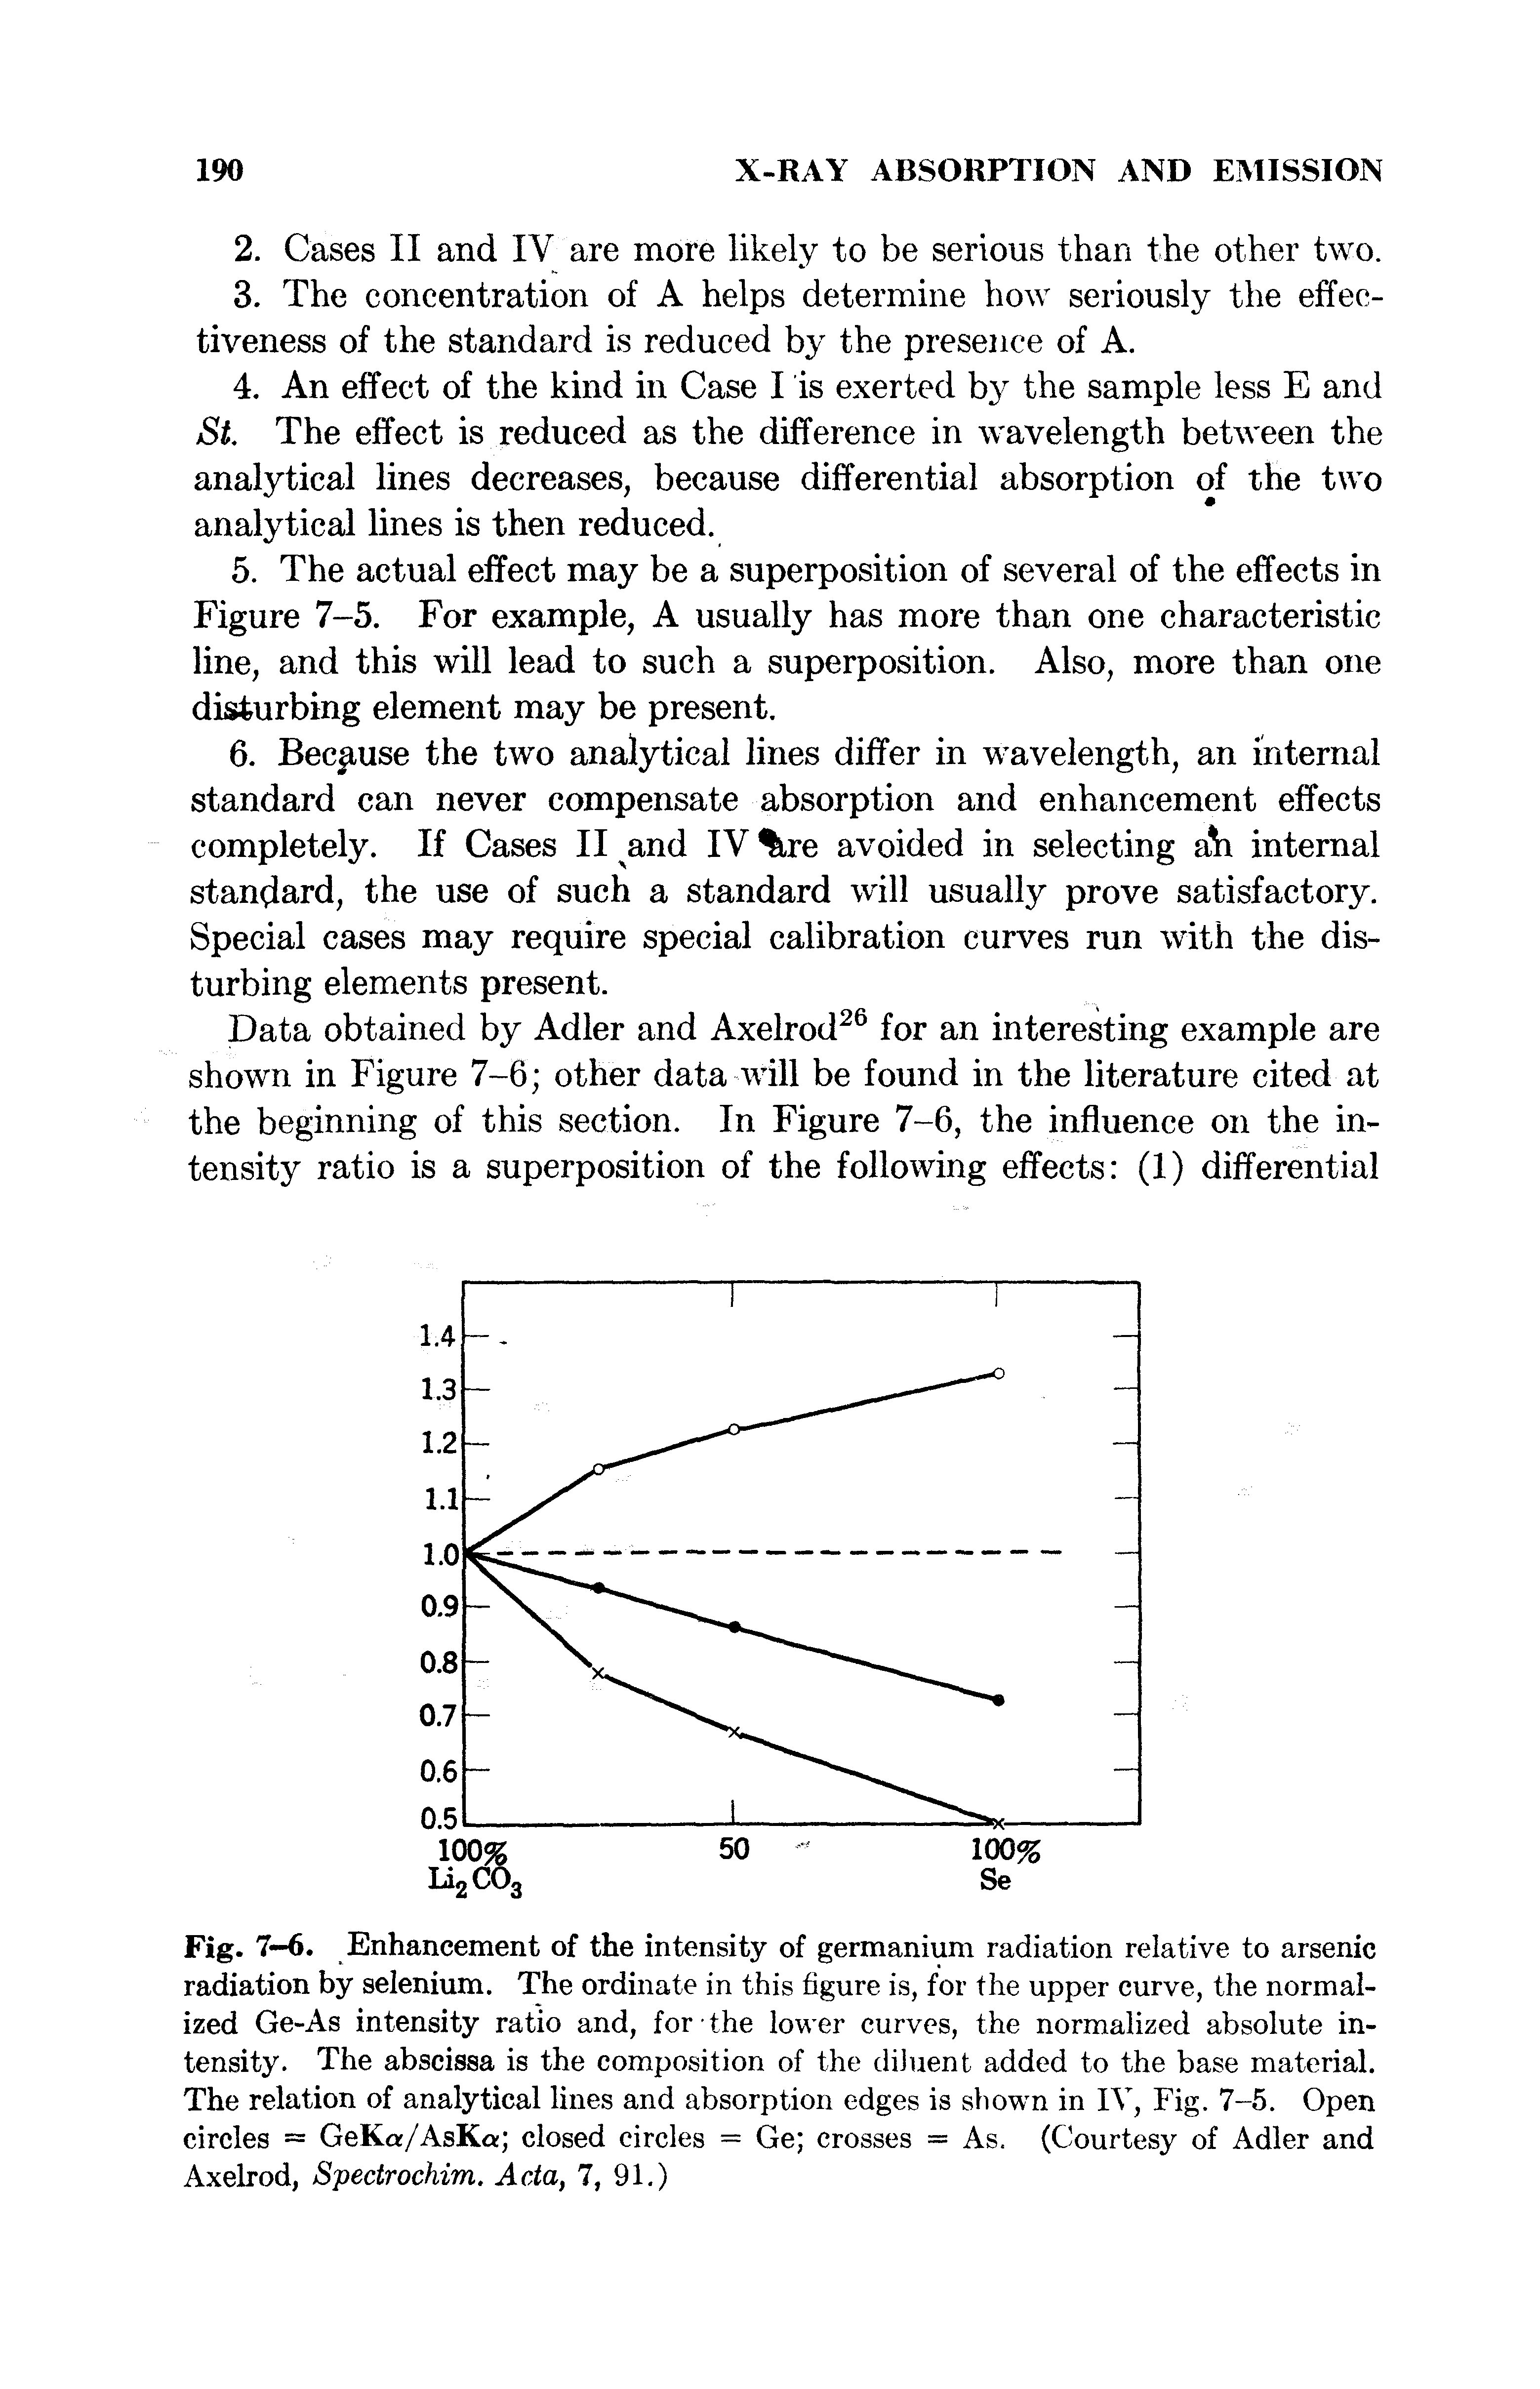 Fig. 7-6. Enhancement of the intensity of germanium radiation relative to arsenic radiation by selenium. The ordinate in this figure is, for the upper curve, the normalized Ge-As intensity ratio and, for the lower curves, the normalized absolute intensity. The abscissa is the composition of the diluent added to the base material. The relation of analytical lines and absorption edges is shown in IV, Fig. 7-5. Open circles = GeKar/AsKa closed circles = Ge crosses = As. (Courtesy of Adler and Axelrod, Spectrochim. Acta, 7, 91.)...